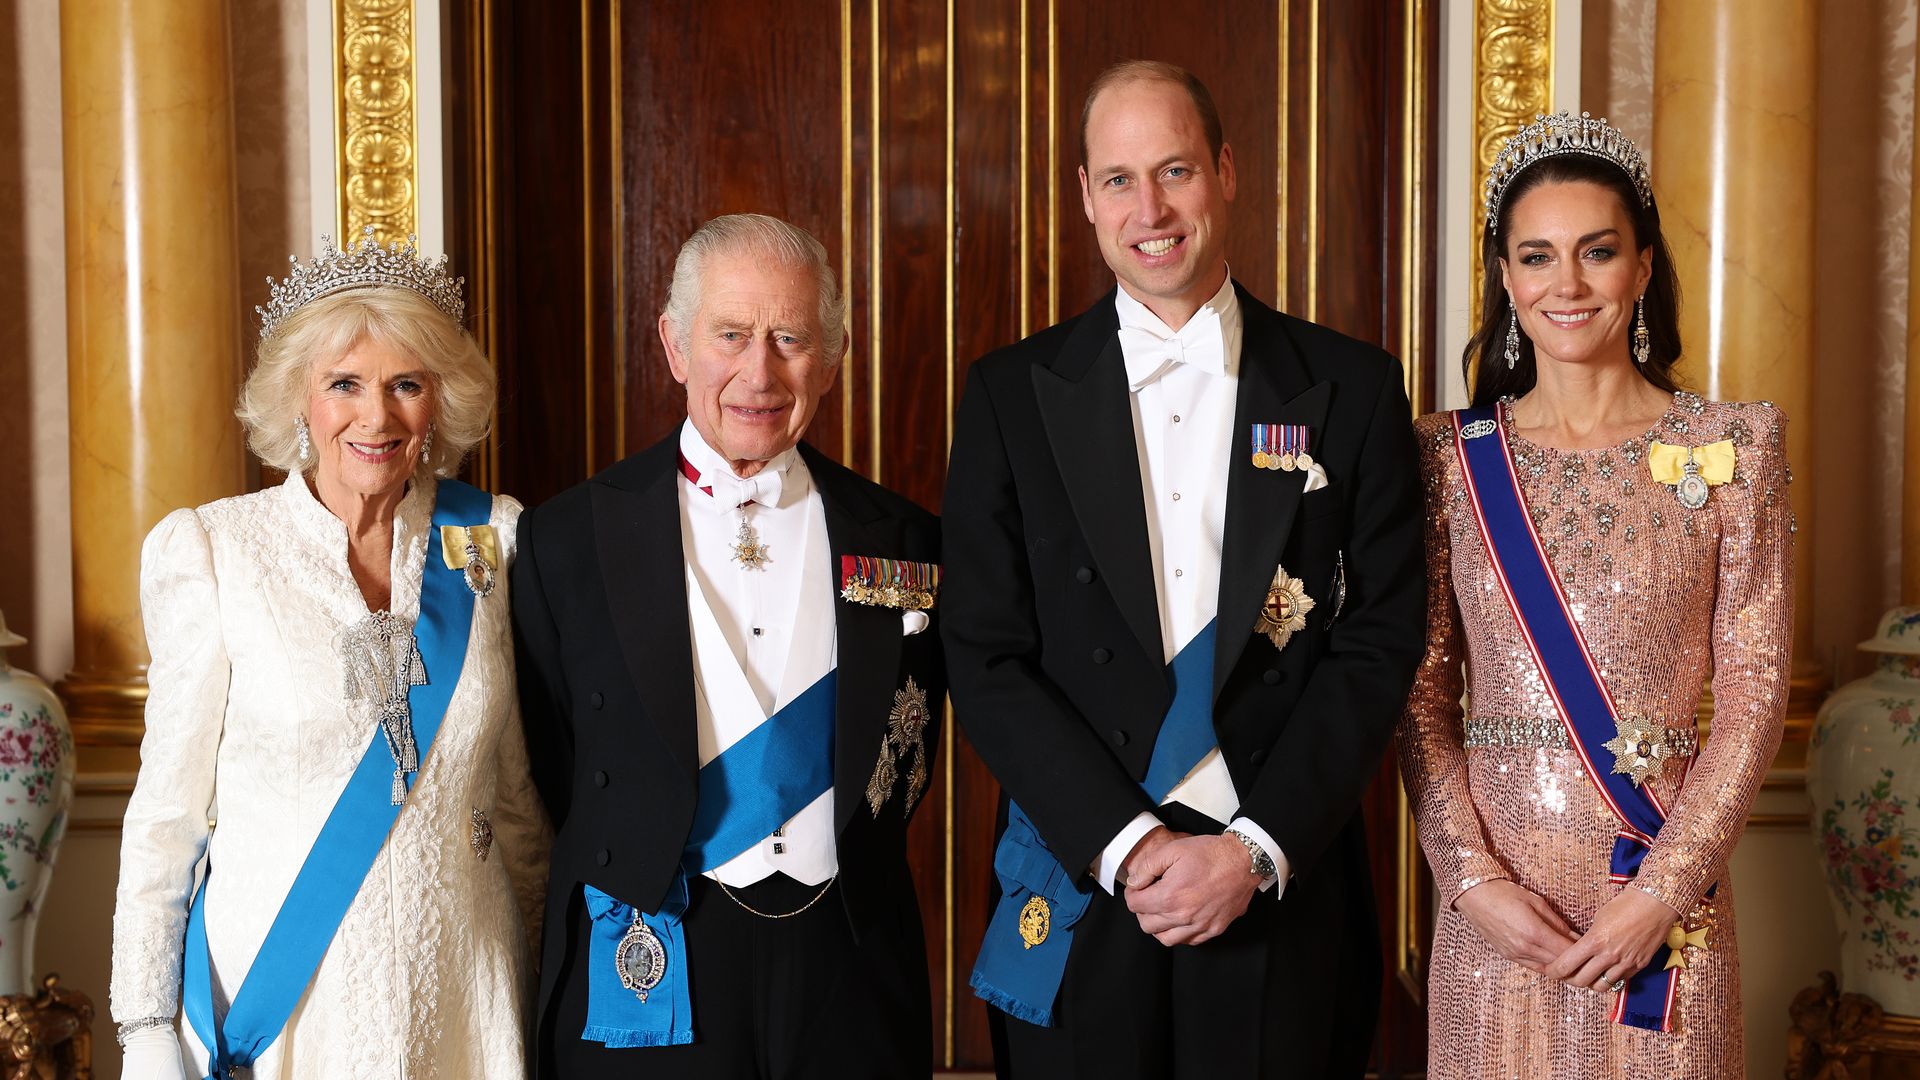 The King and Queen with William and Kate at Diplomatic reception